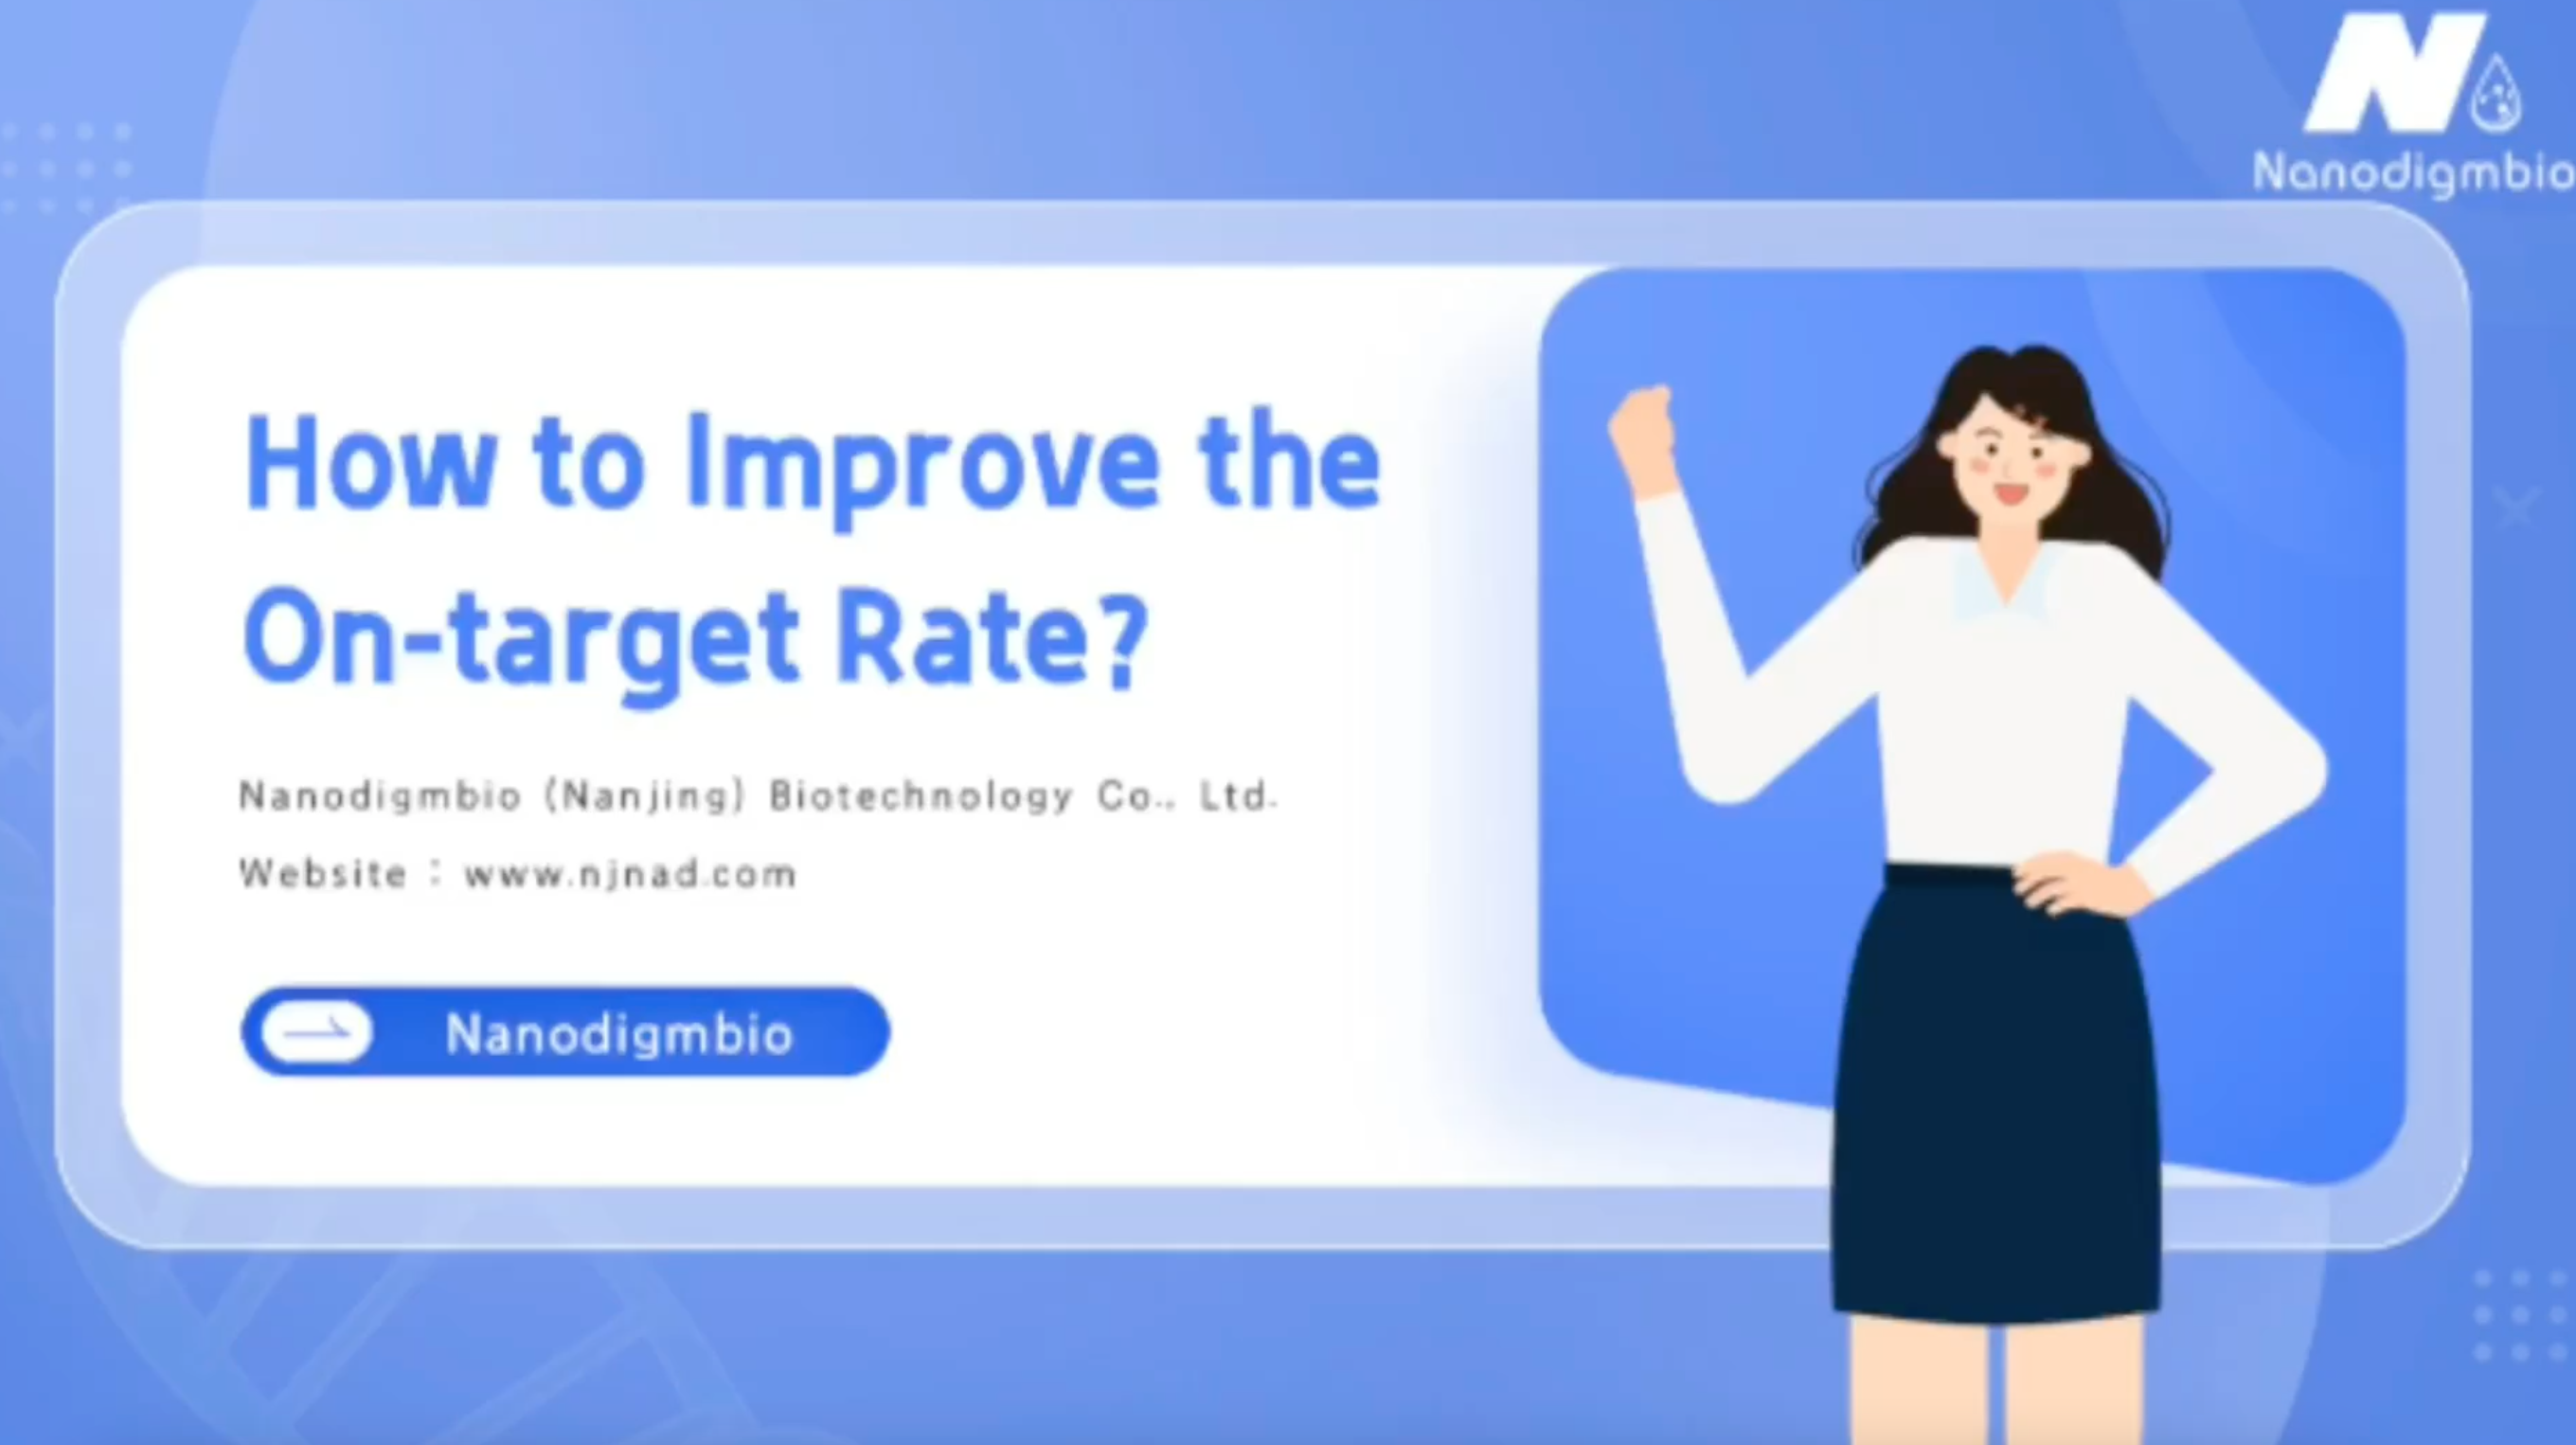 How to improve the on-target rate?